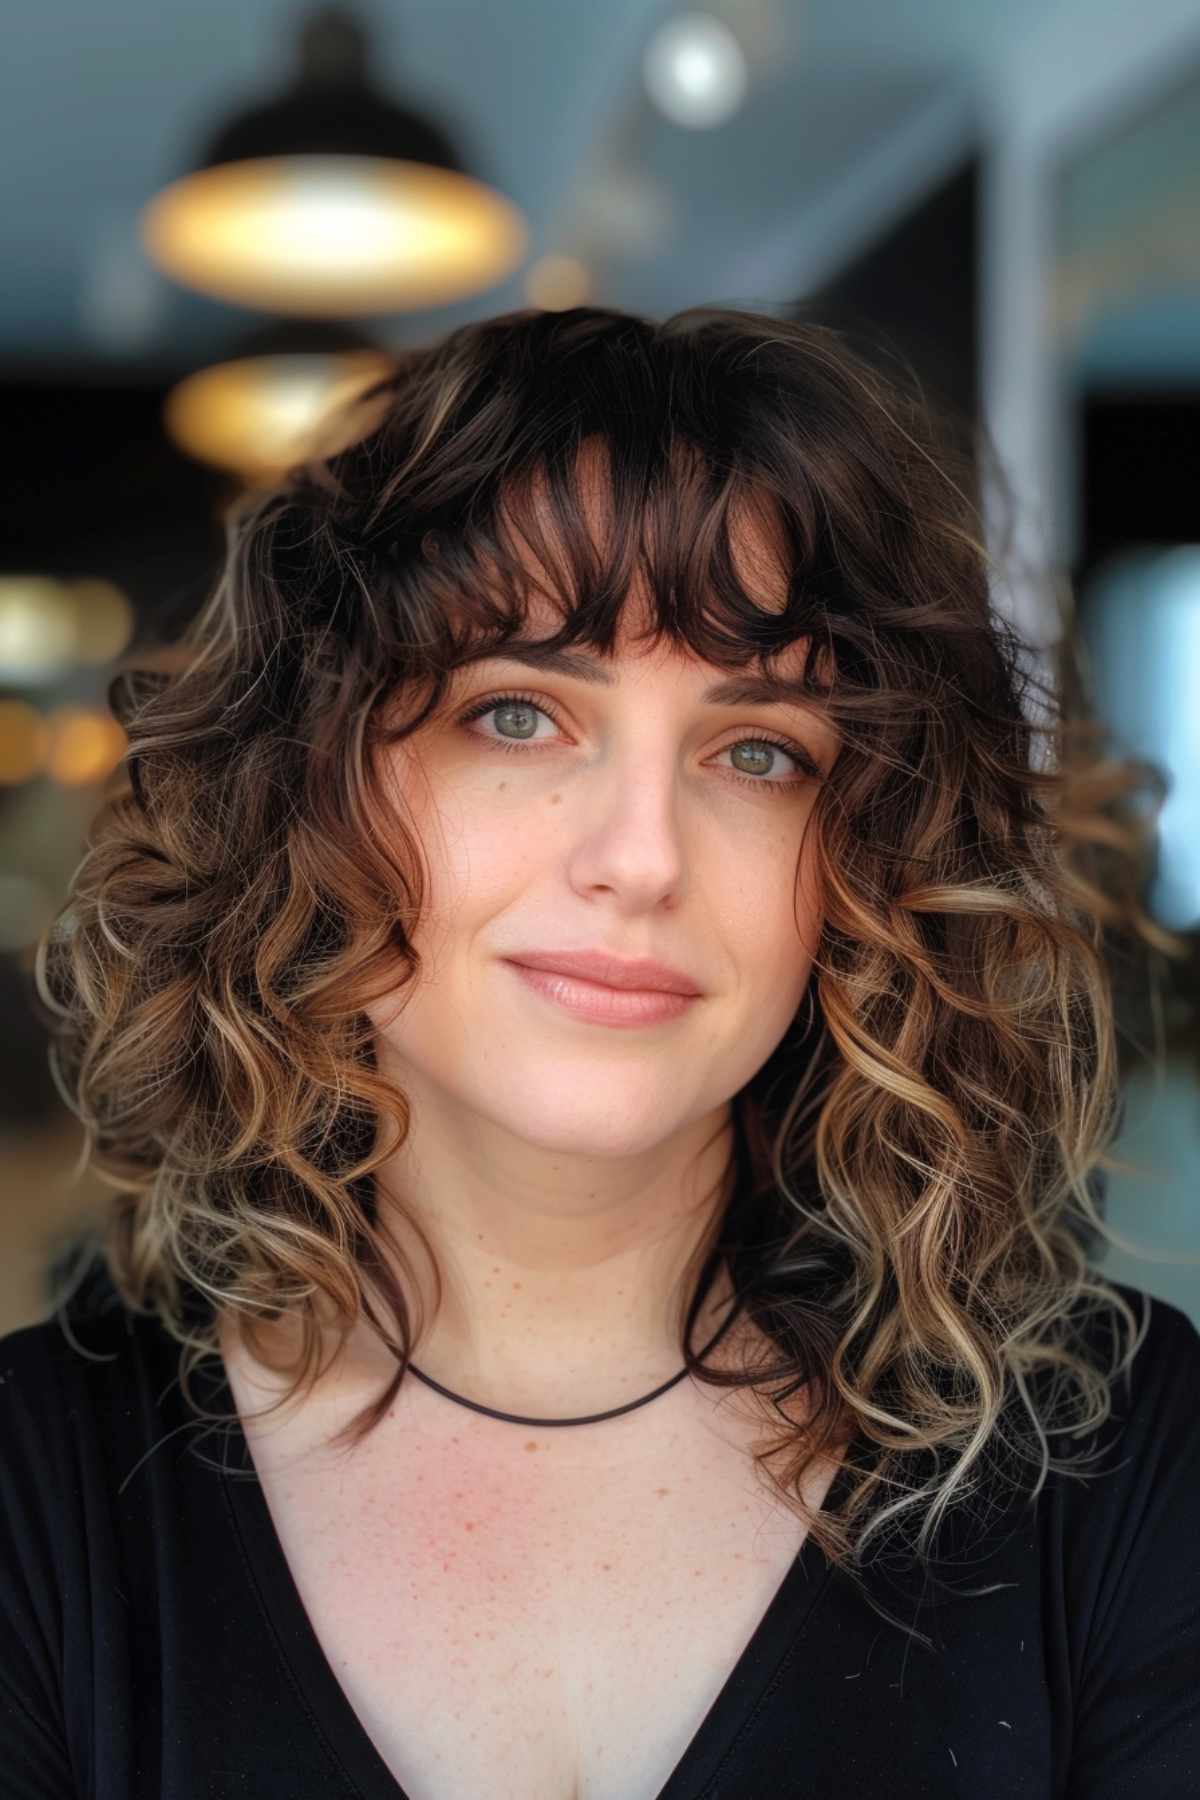 Curly hair with layered bangs on a woman.